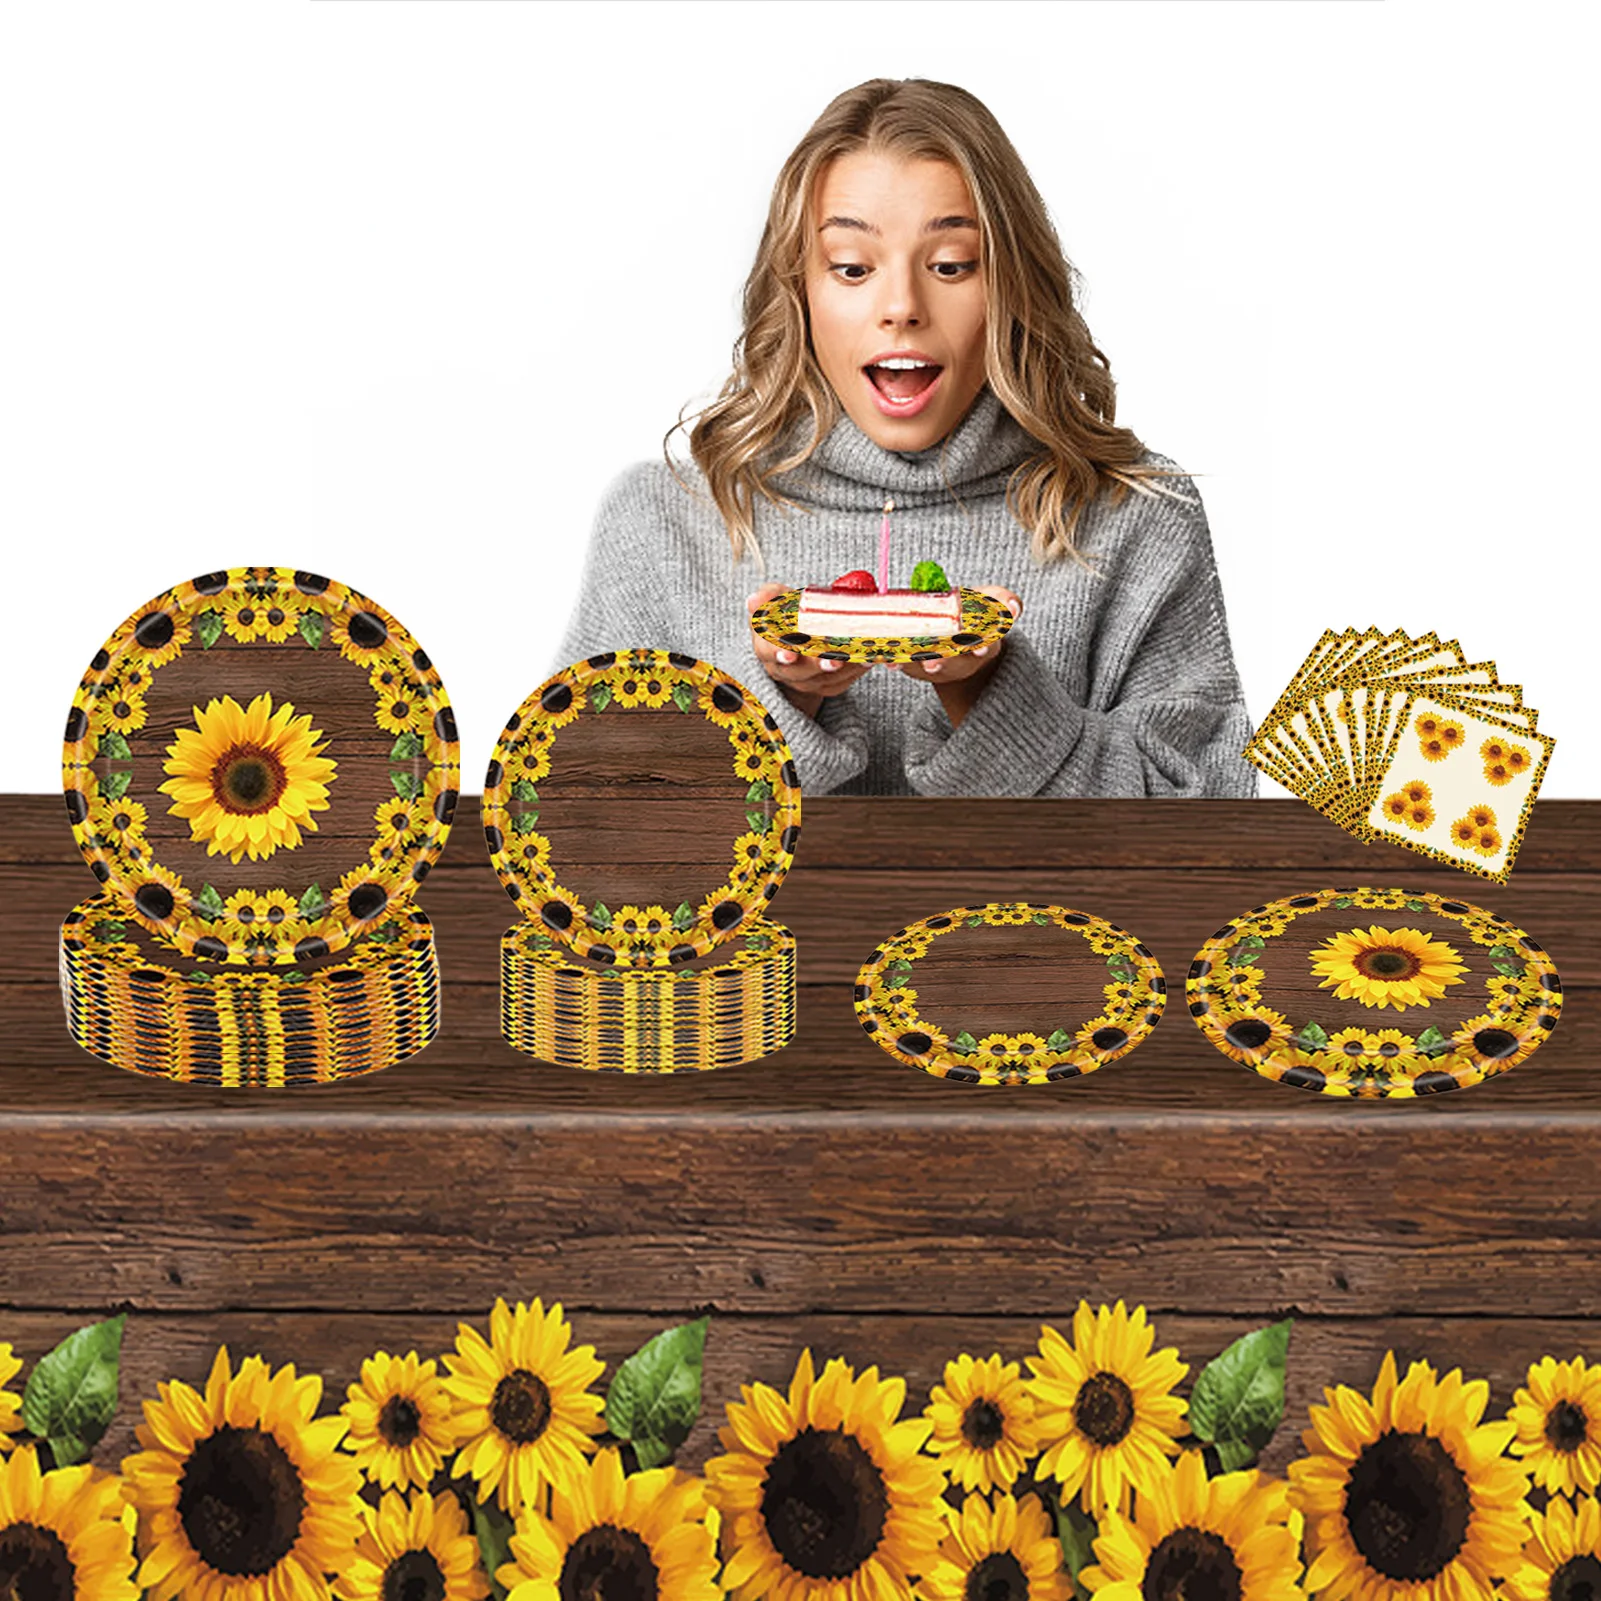 

16 Guests Floral Party Supplies Sunflower Party Supplies With Tablecloth Plates And Napkins Paper Dinnerware Set For 16 Guests